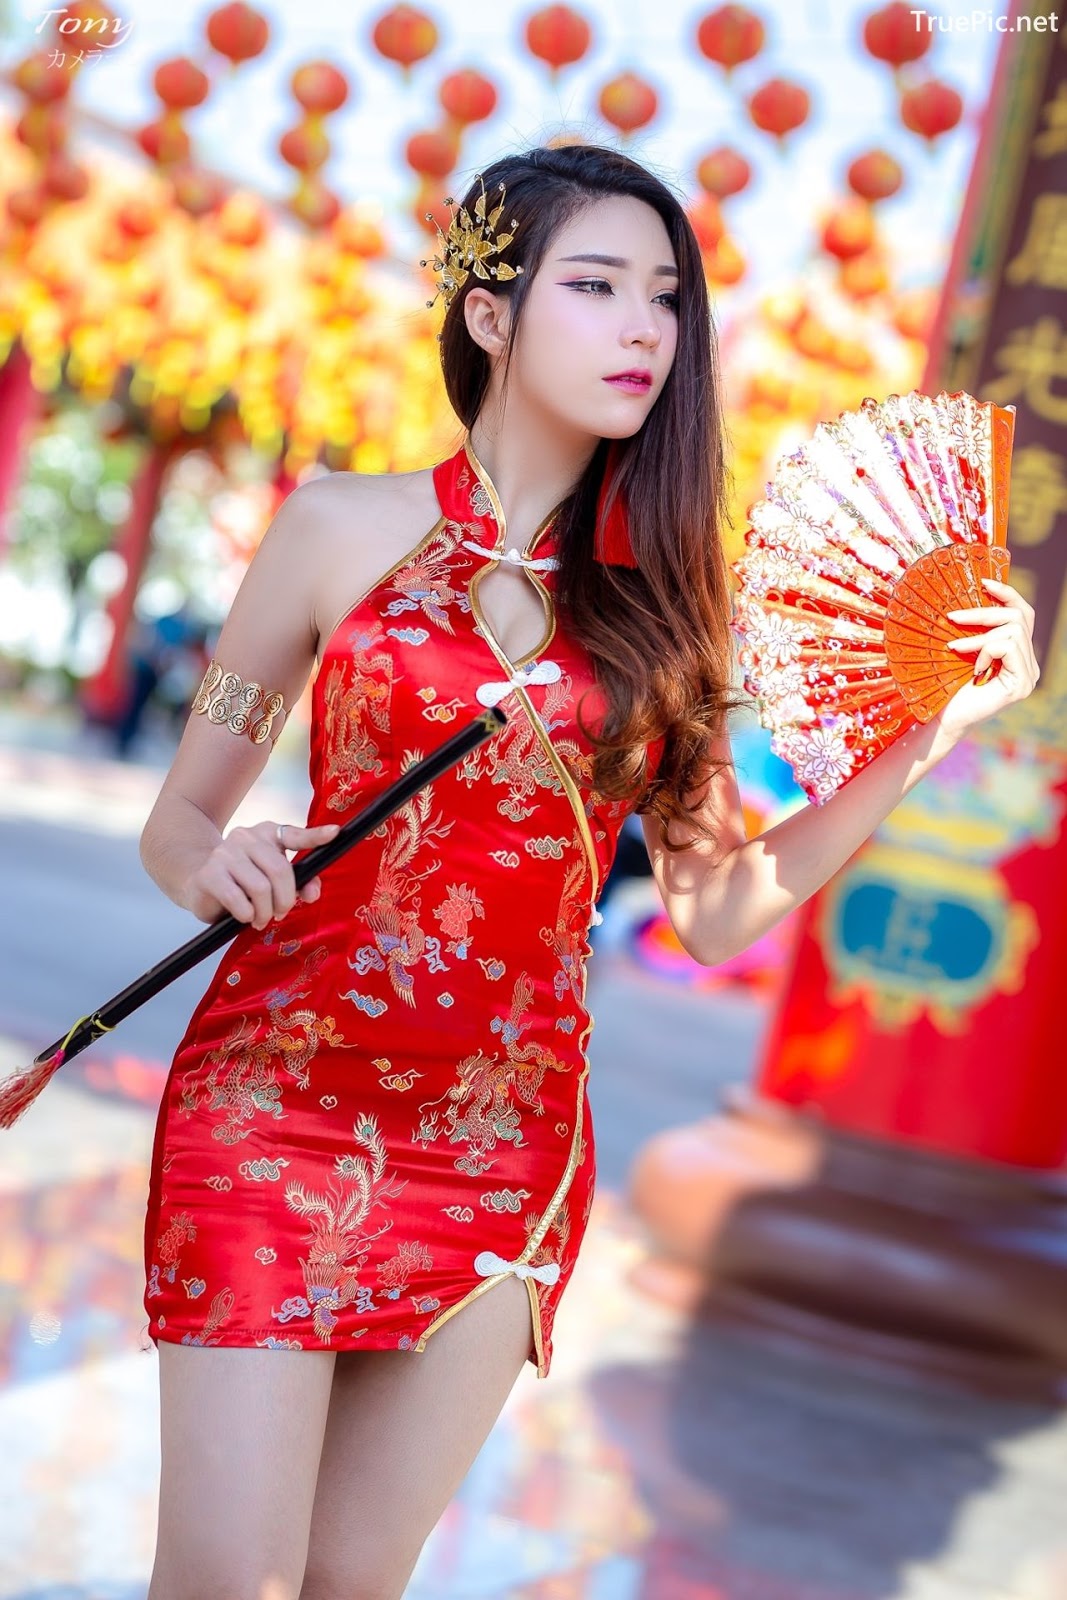 Image-Thailand-Hot-Model-Janet-Kanokwan-Saesim-Sexy-Chinese-Girl-Red-Dress-Traditional-TruePic.net- Picture-15